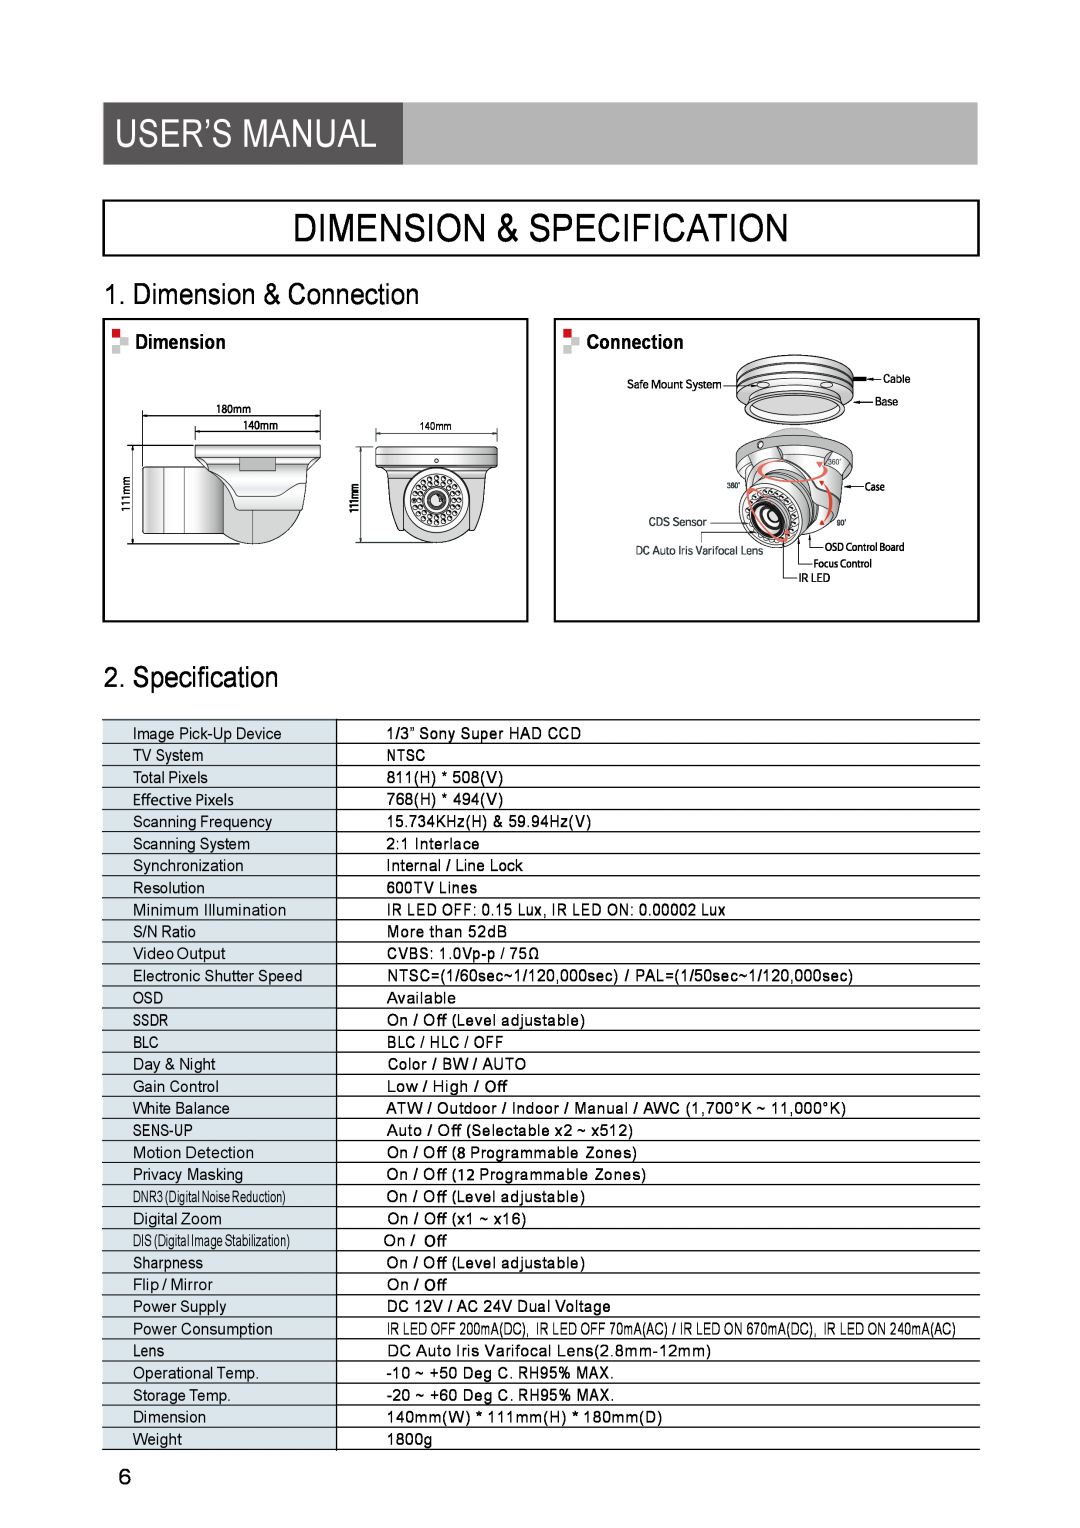 Yahee RETRT2812-1 manual Dimension & Specification, User’S Manual, Dimension & Connection 